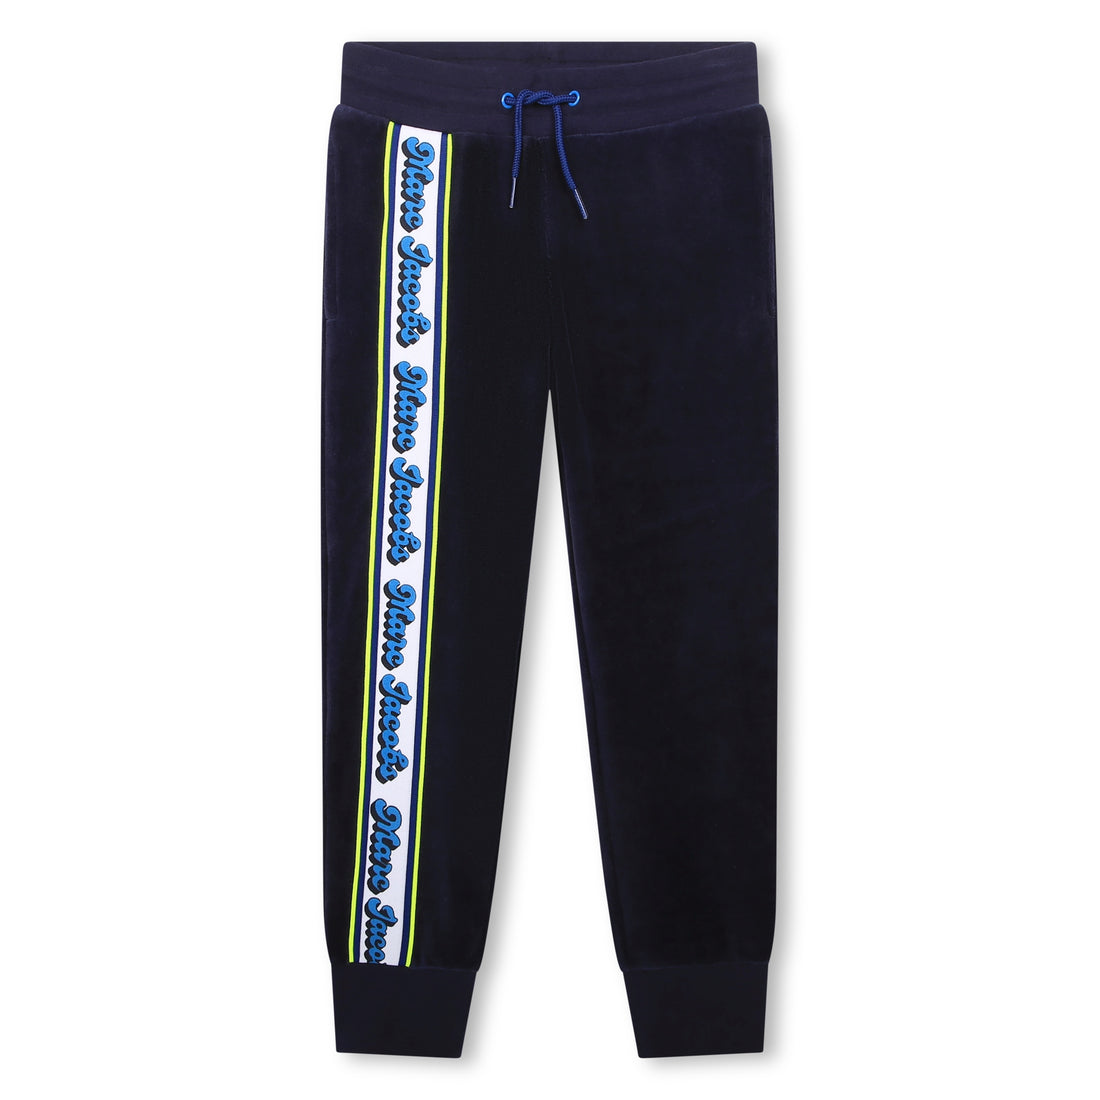 The Marc Jacobs Jogging Bottoms Style: W24290